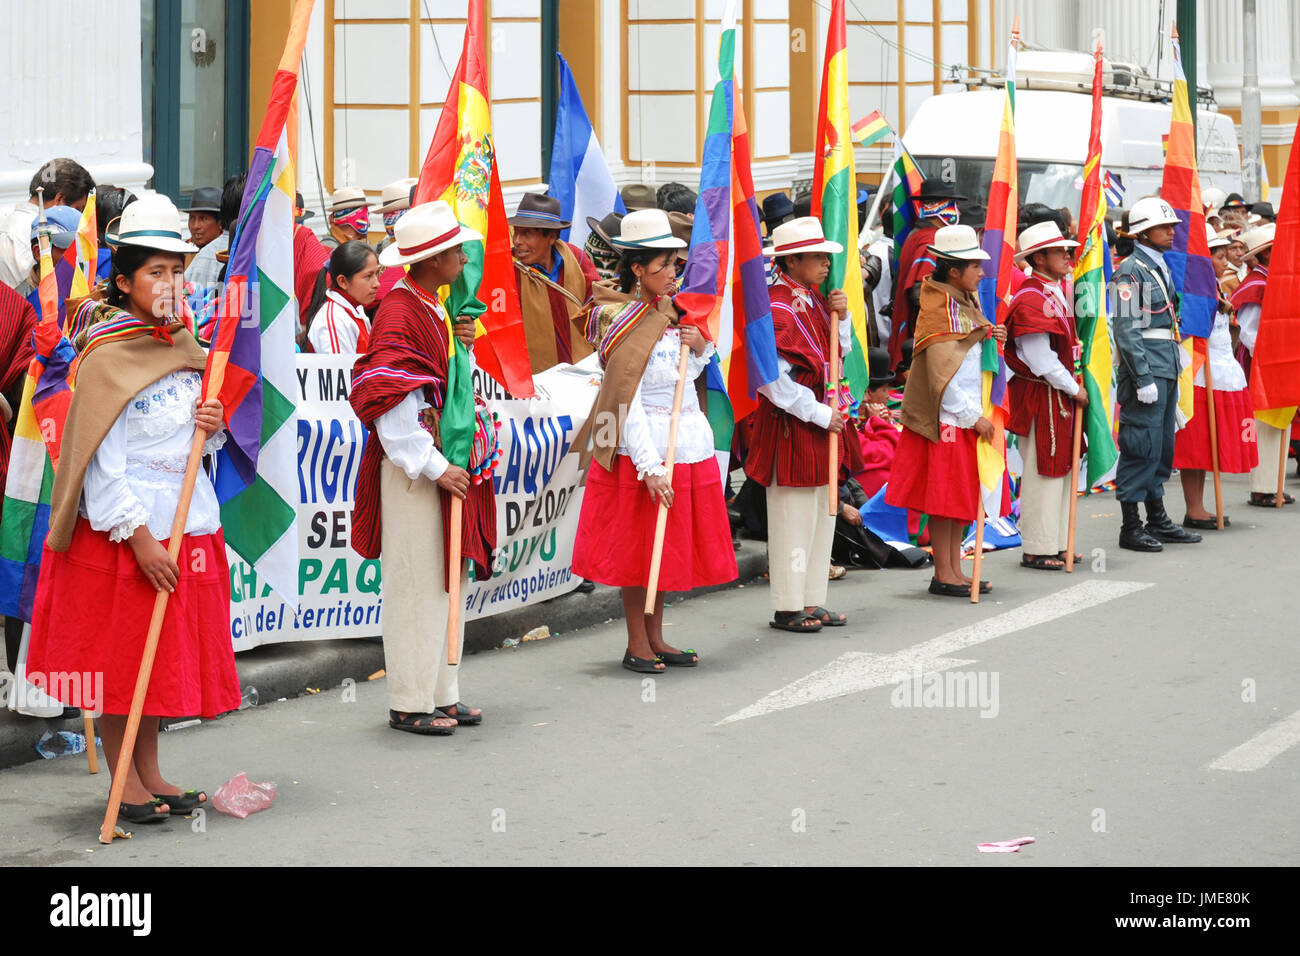 Bolivian people standing with whipala flags during the celebration of the plurinational state foundation day, La Paz, Bolivia, South America Stock Photo